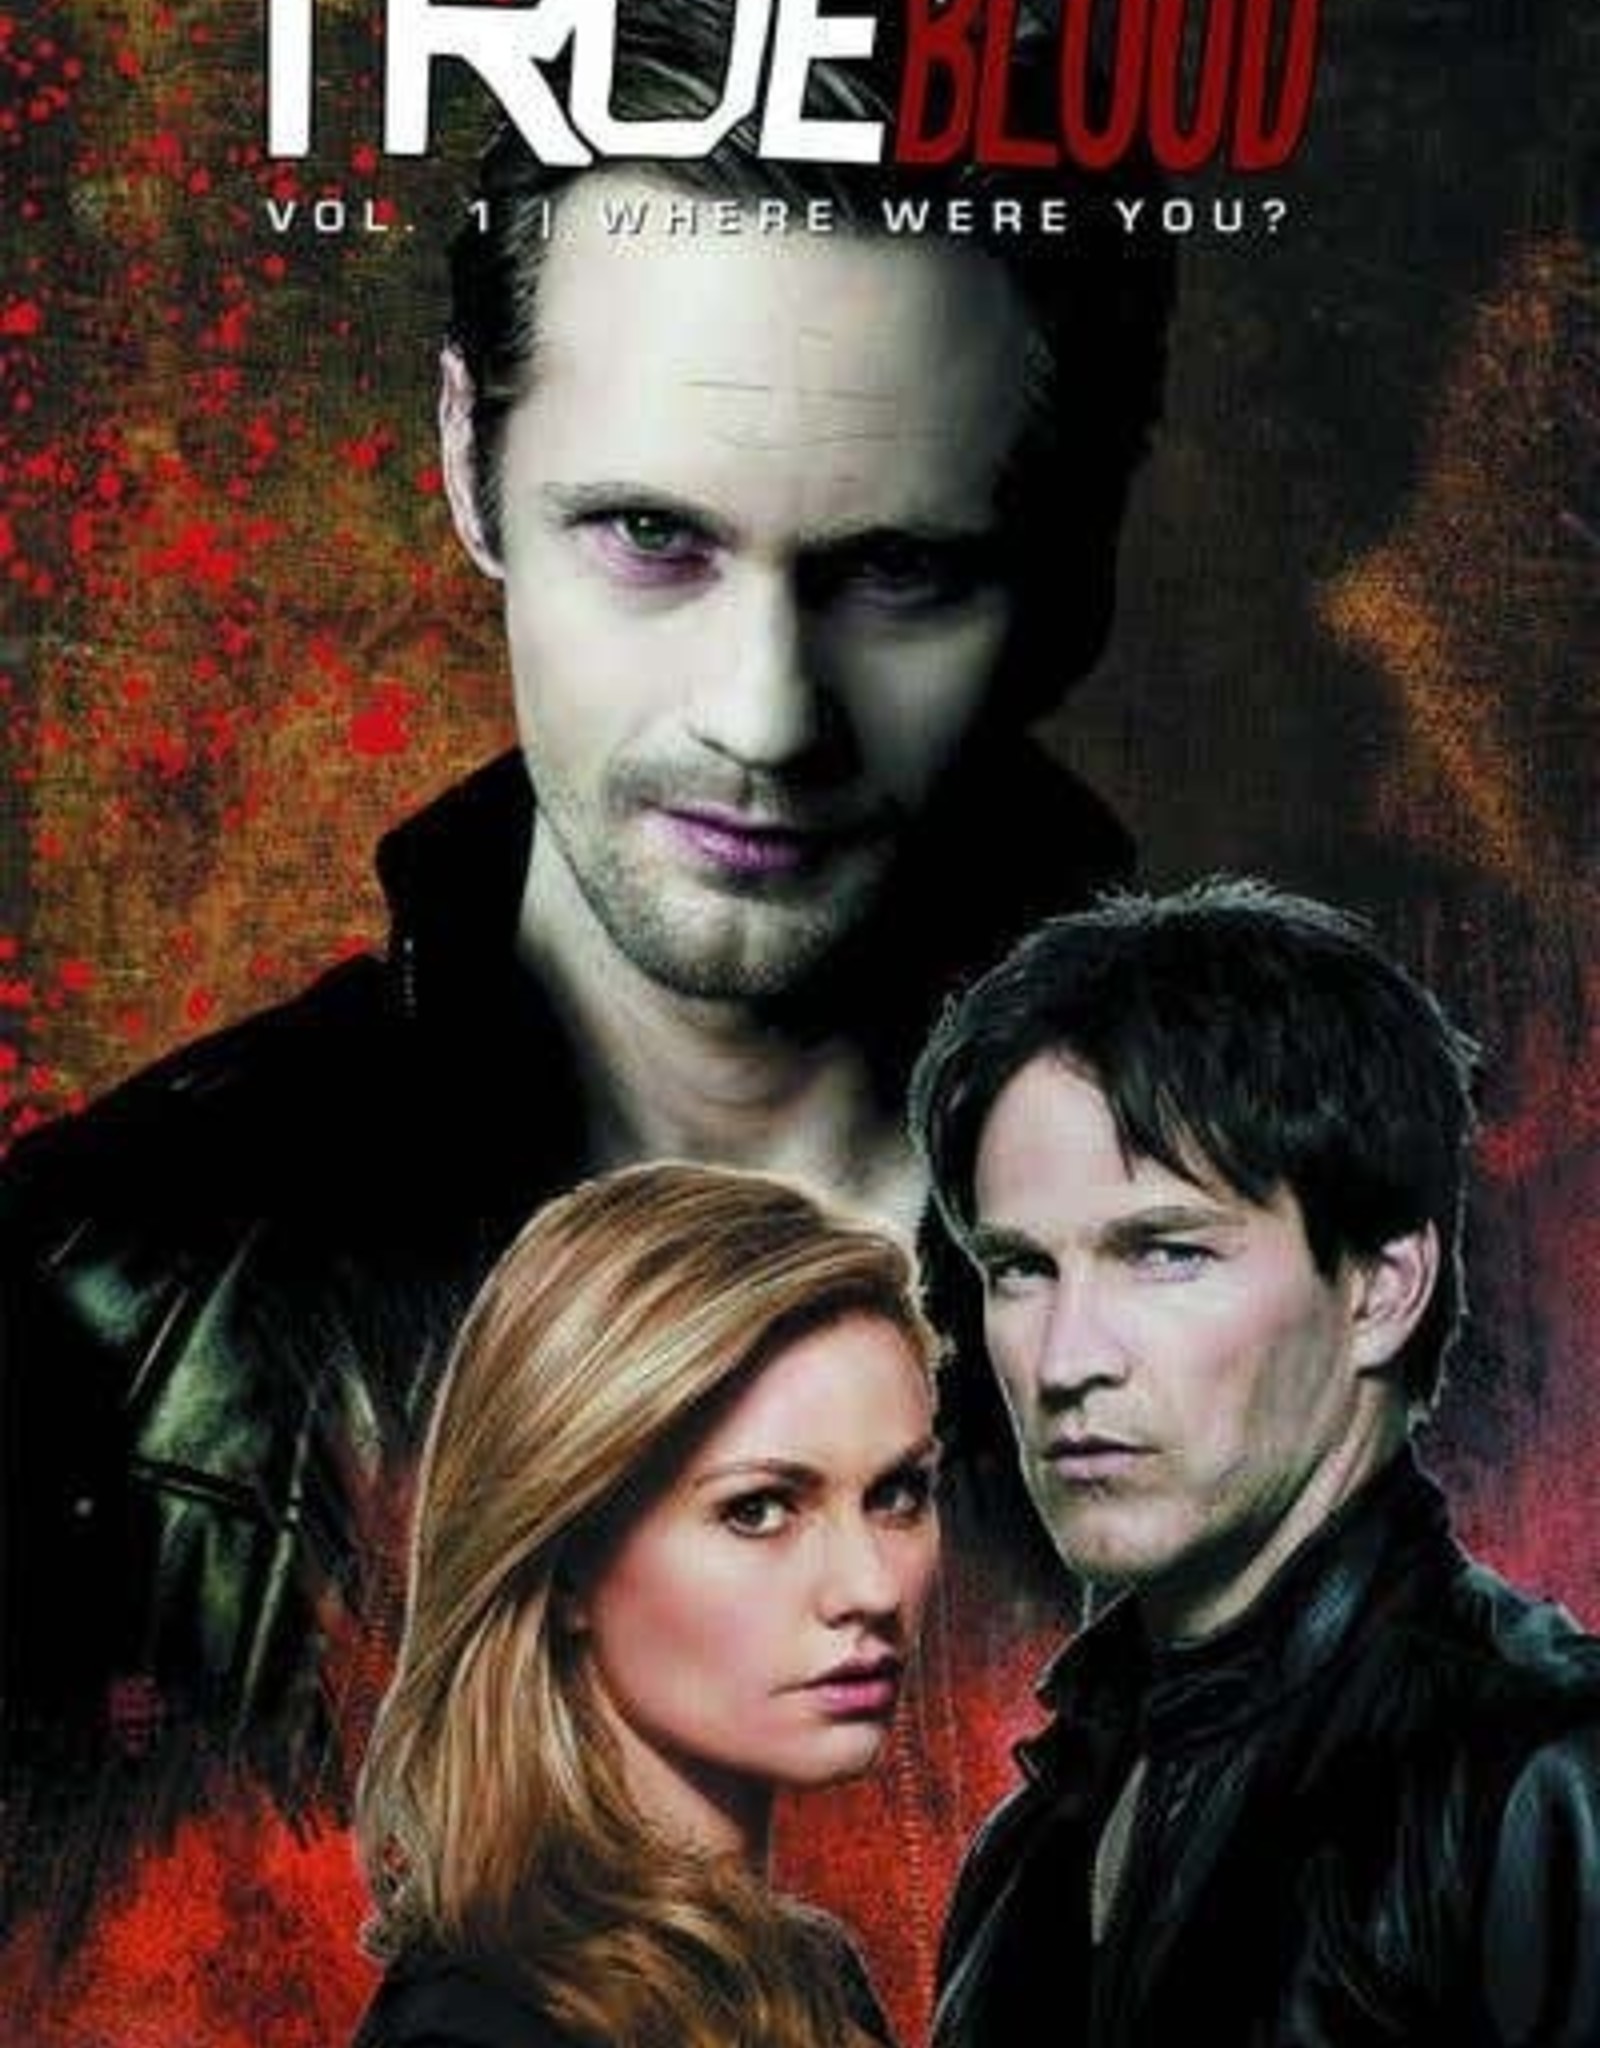 IDW Publishing True Blood Hardcover Volume 04 Where Were You?